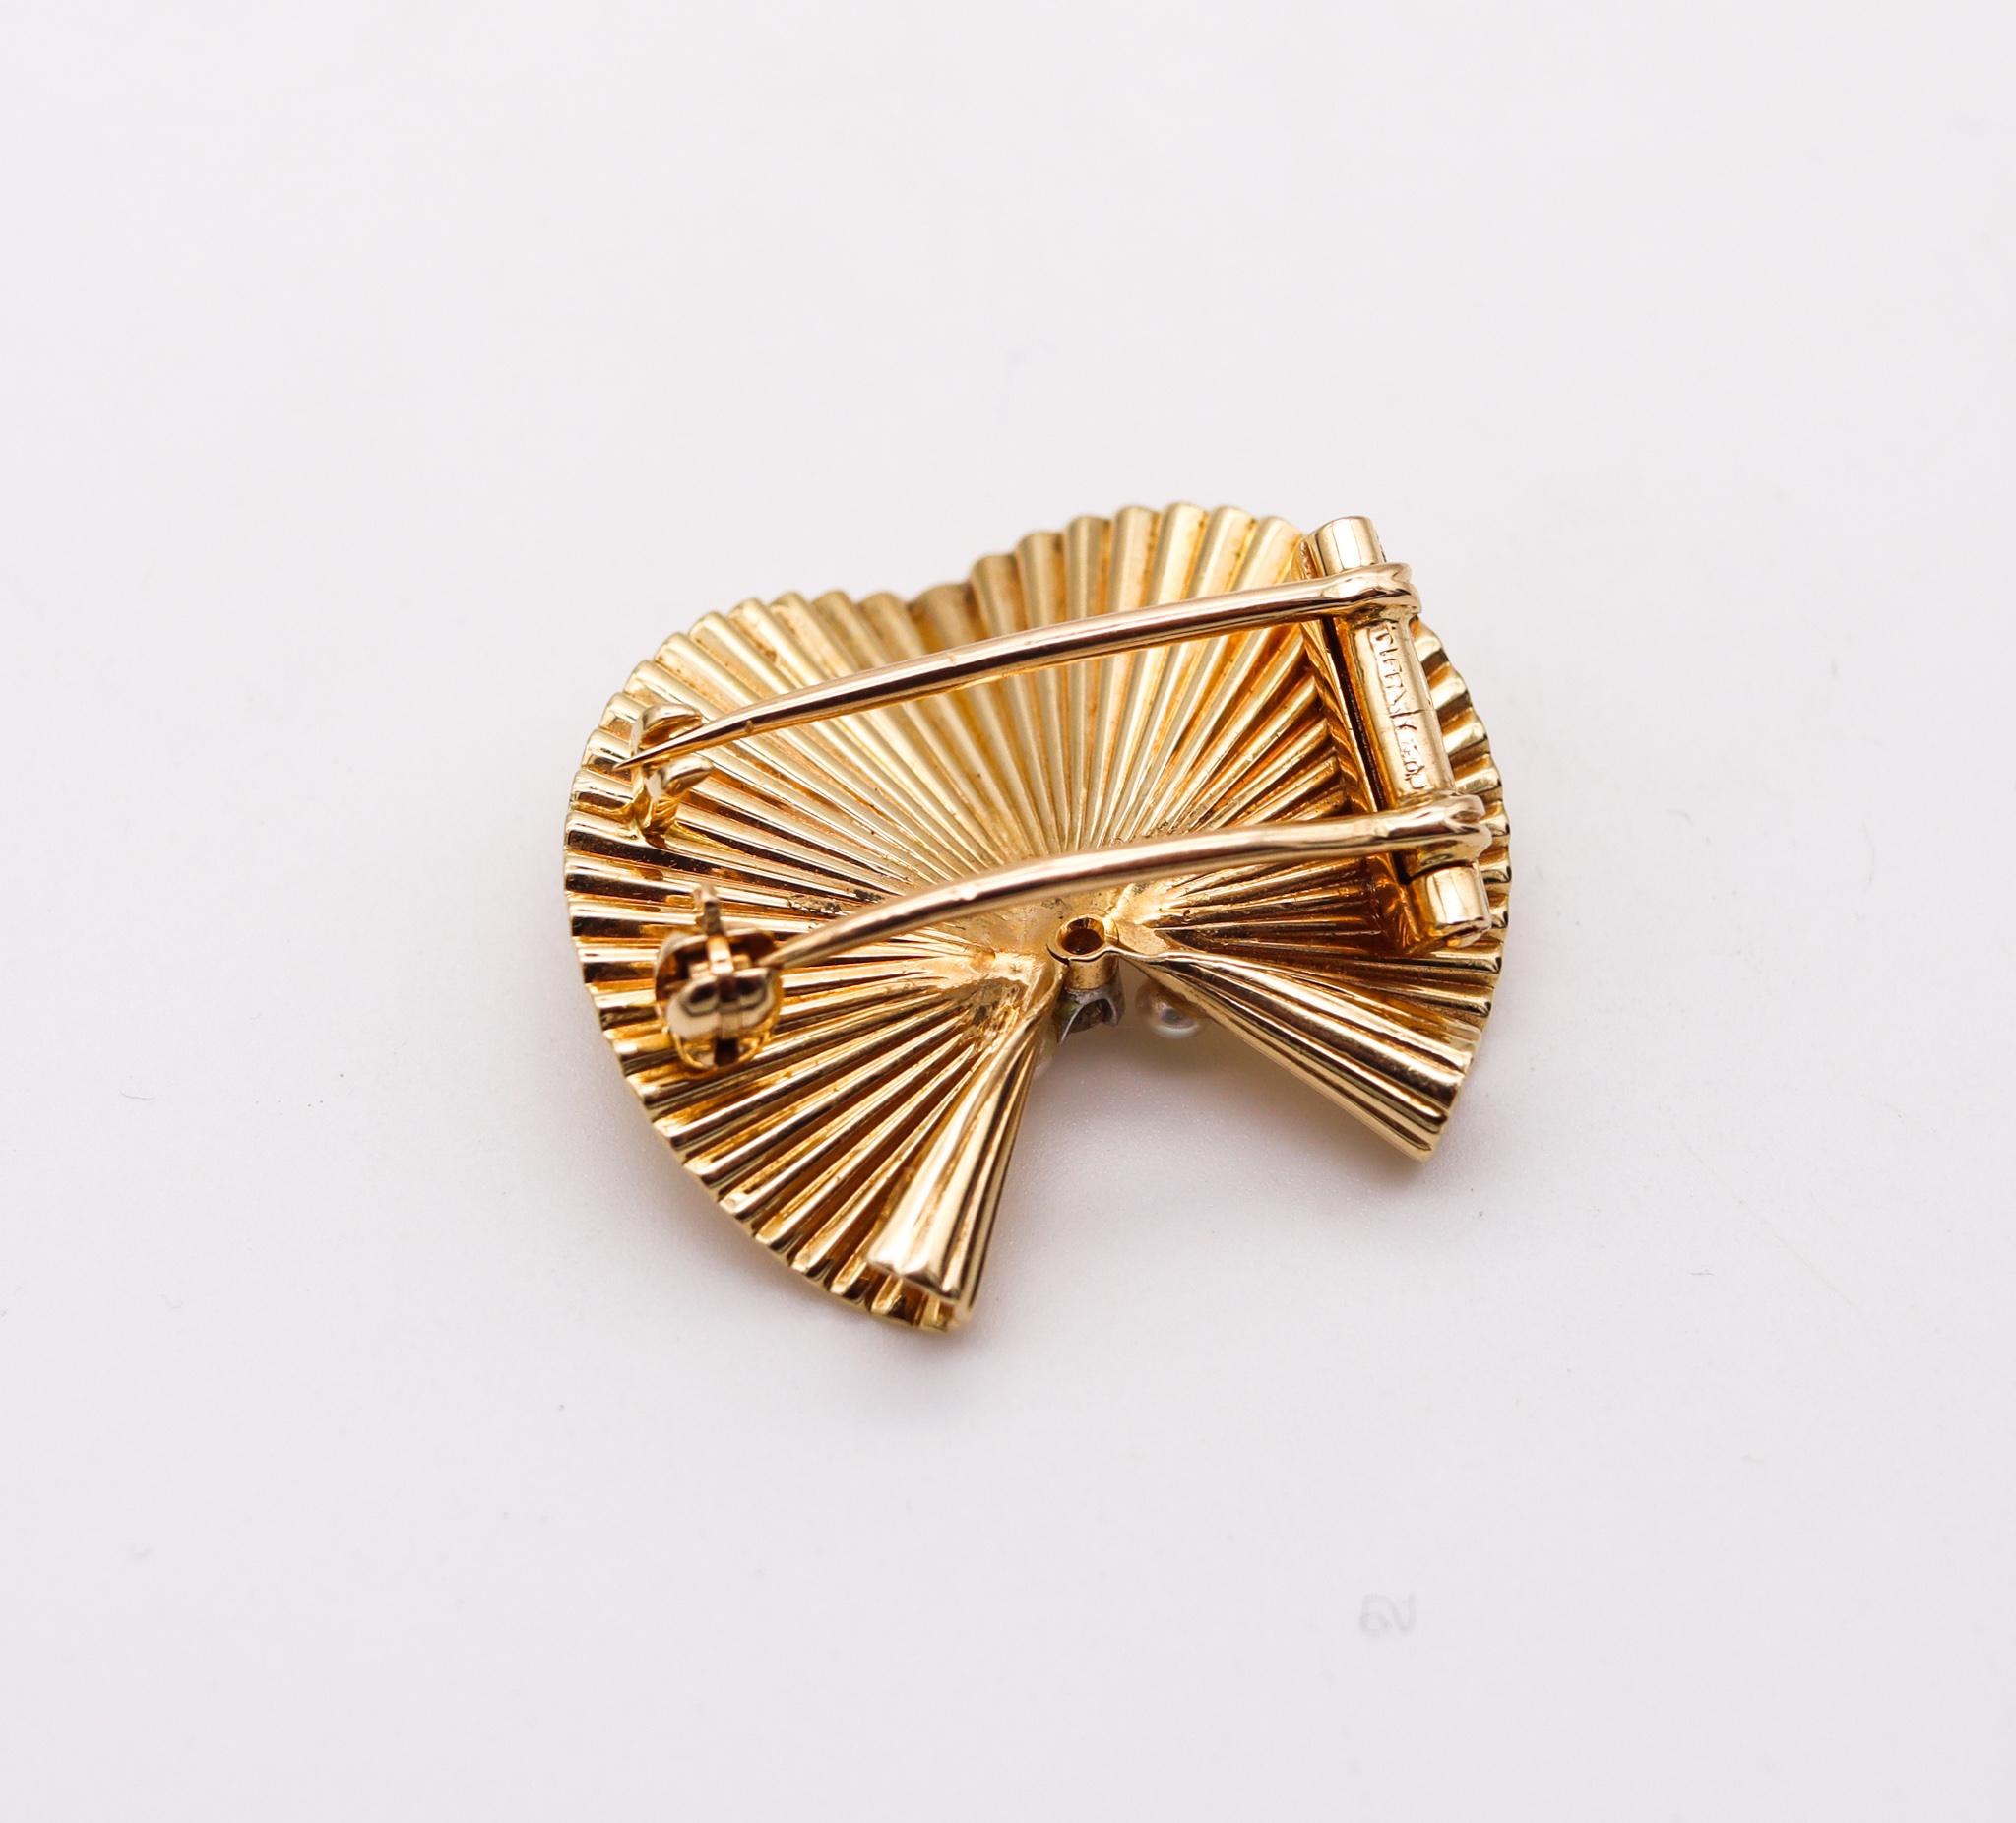 Round Cut Tiffany & Co. 1960 George Schuler Brooch in 14Kt Gold with Pearls and Diamond